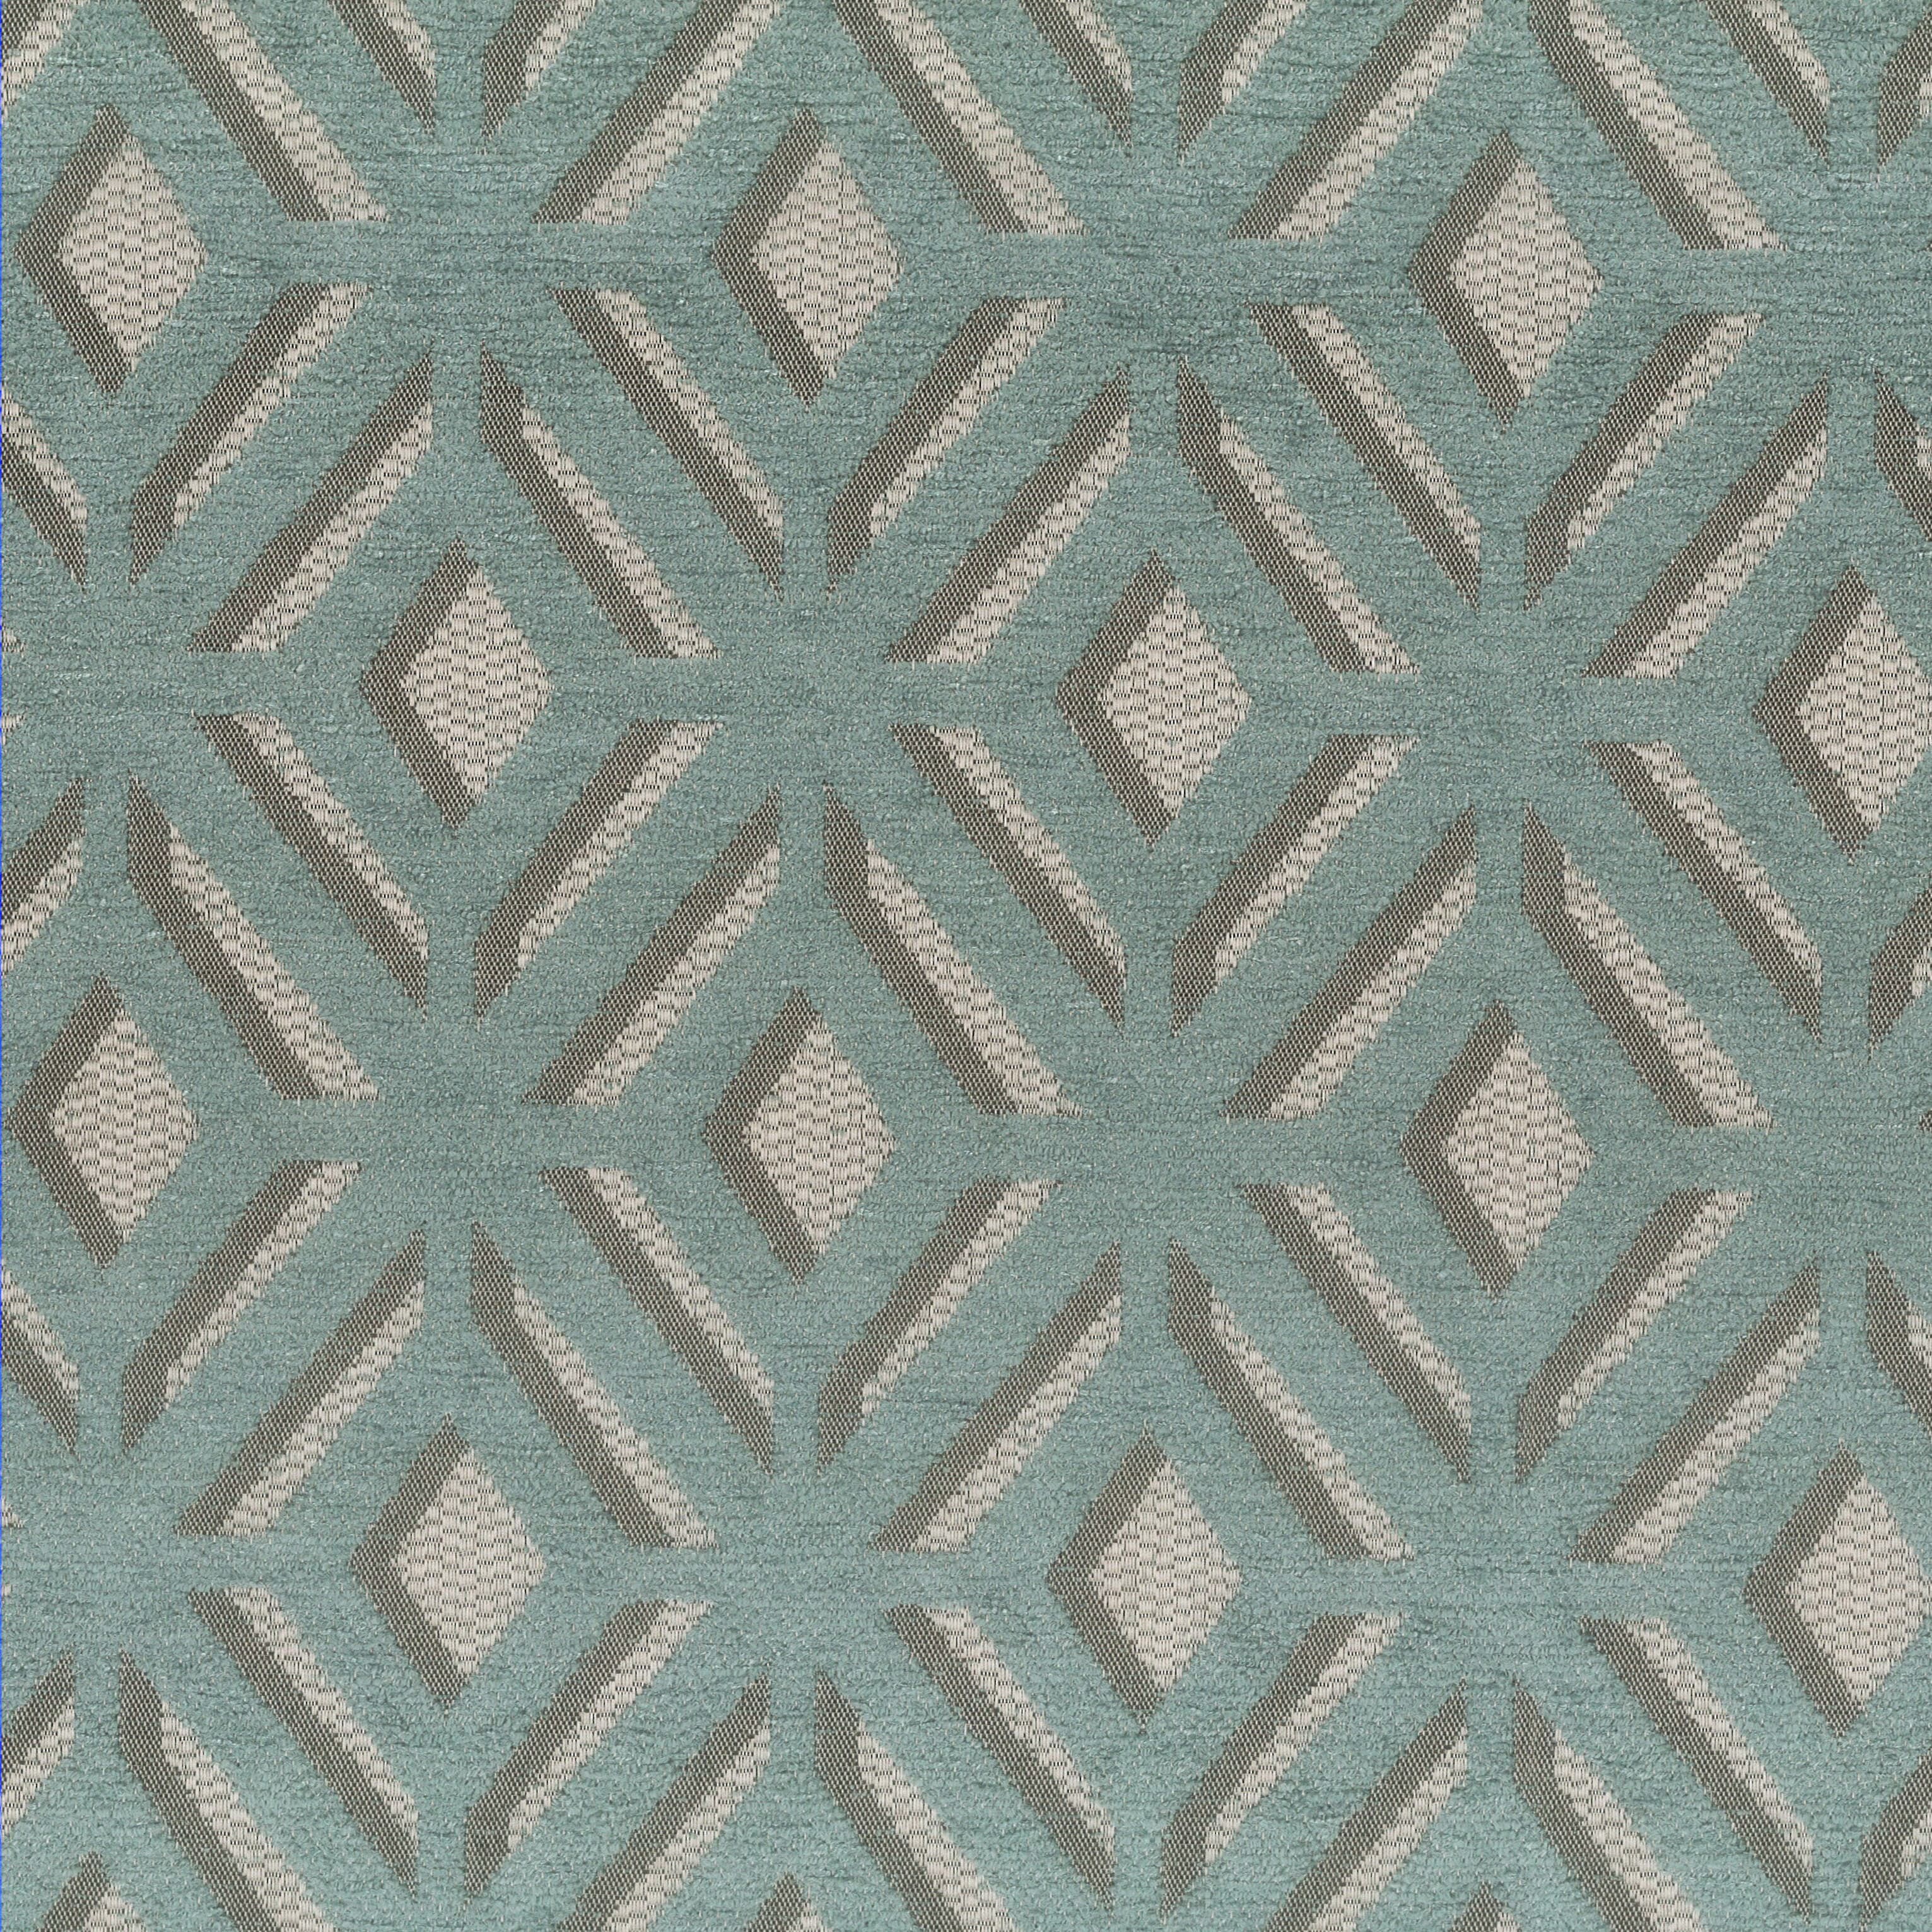 Kittering 1 Teal by Stout Fabric